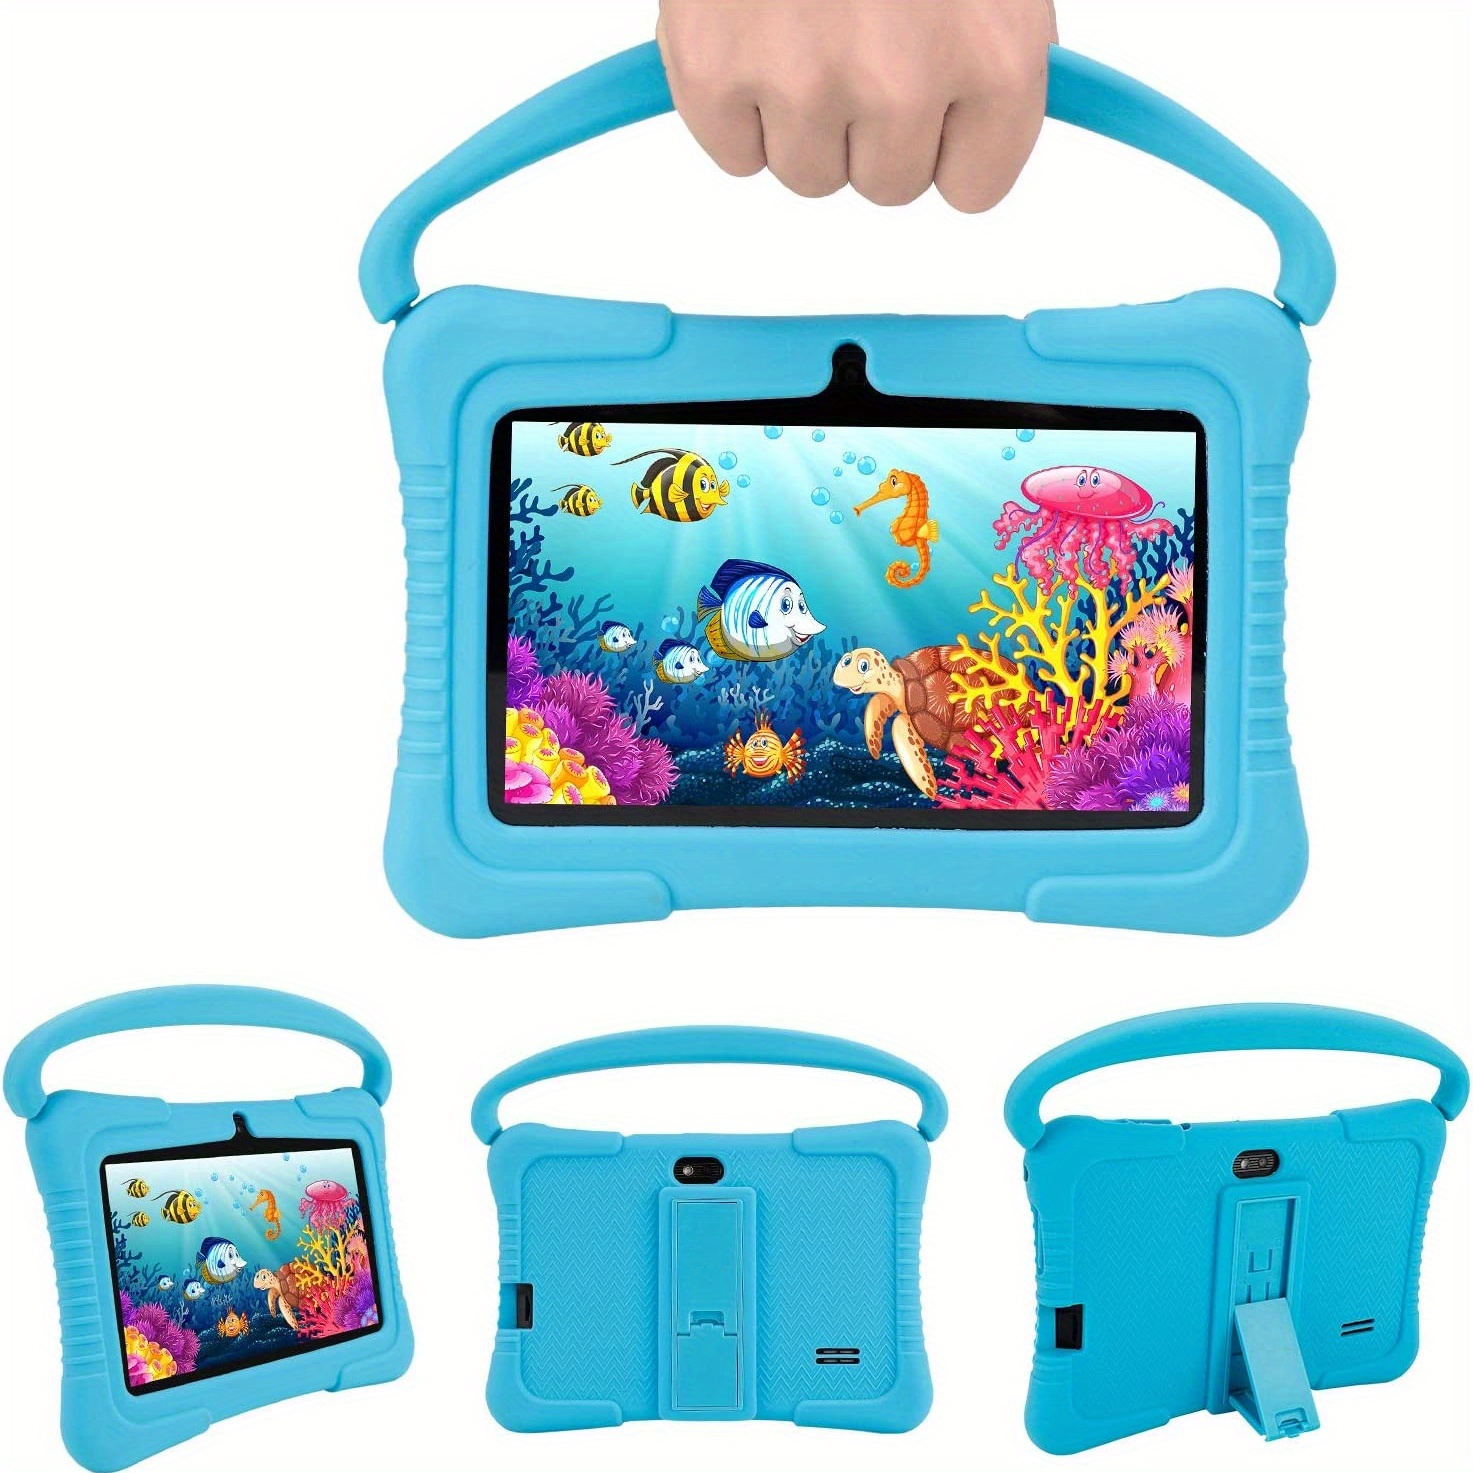 kids tablet education 7 inch pad preschool study 32g study pad wifi 6 hd screen free apps download 2camera parental lock silicone protect free montessori education games